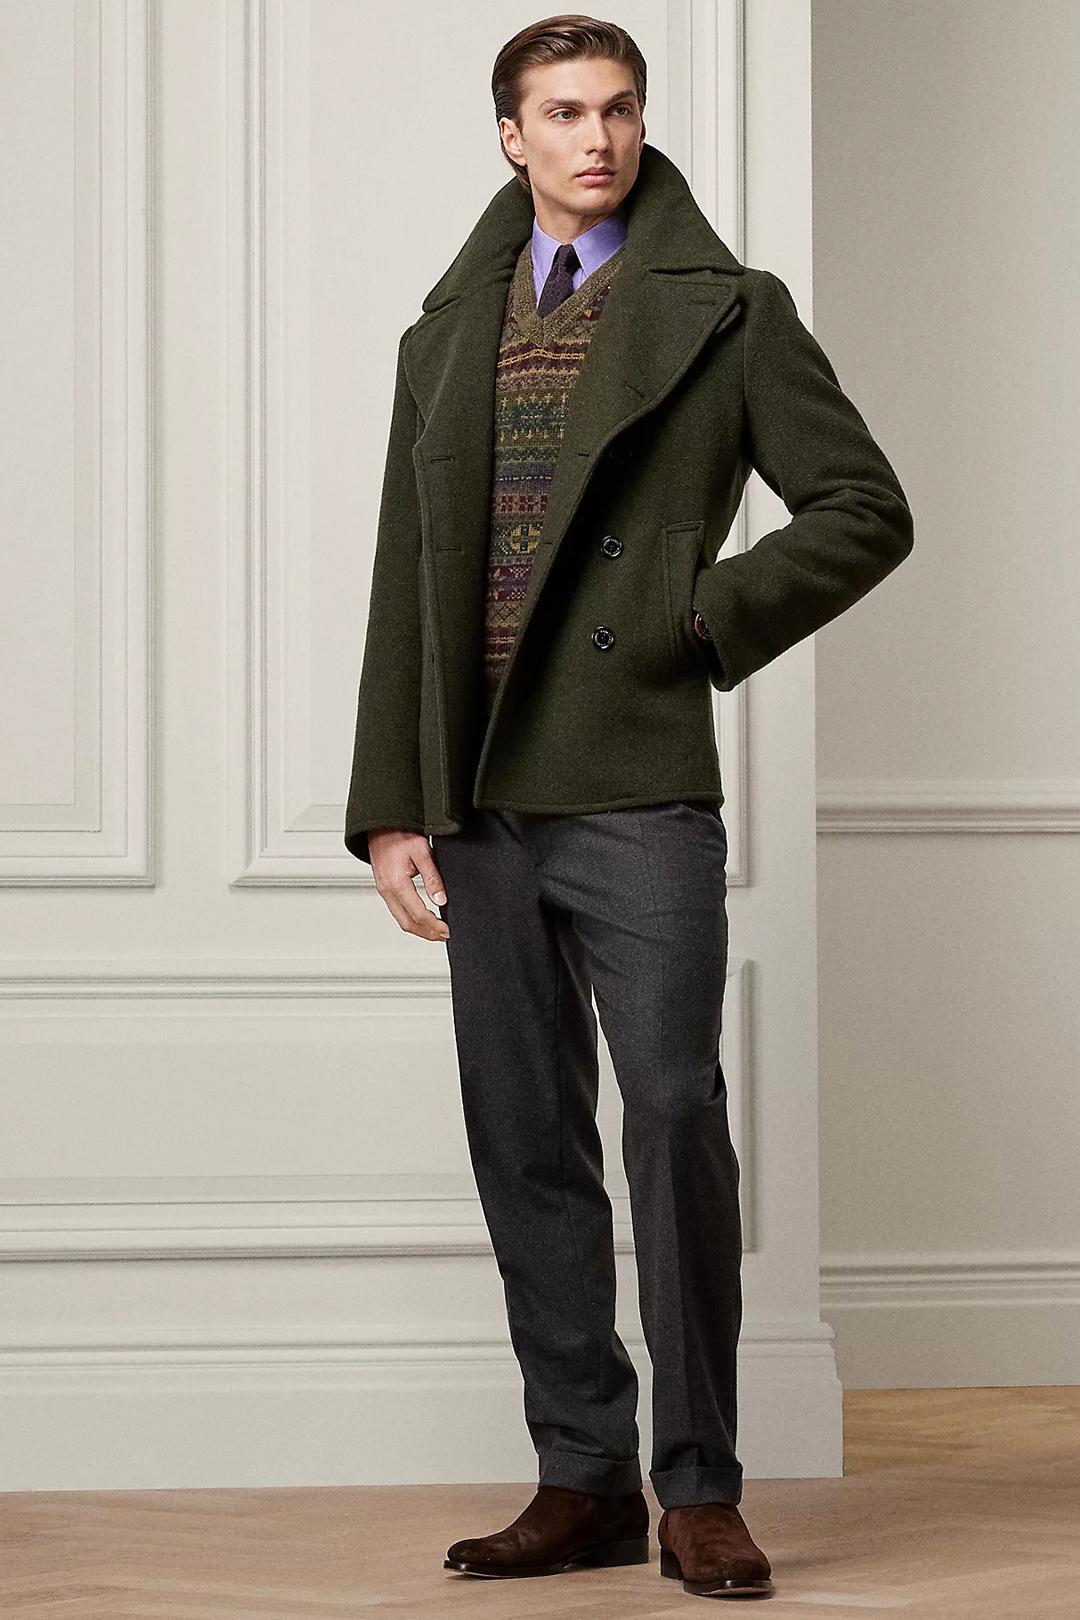 Green pea coat, purple dress shirt, brown fair isle sweater, charcoal dress pants, and brown suede Chelsea boots outfit